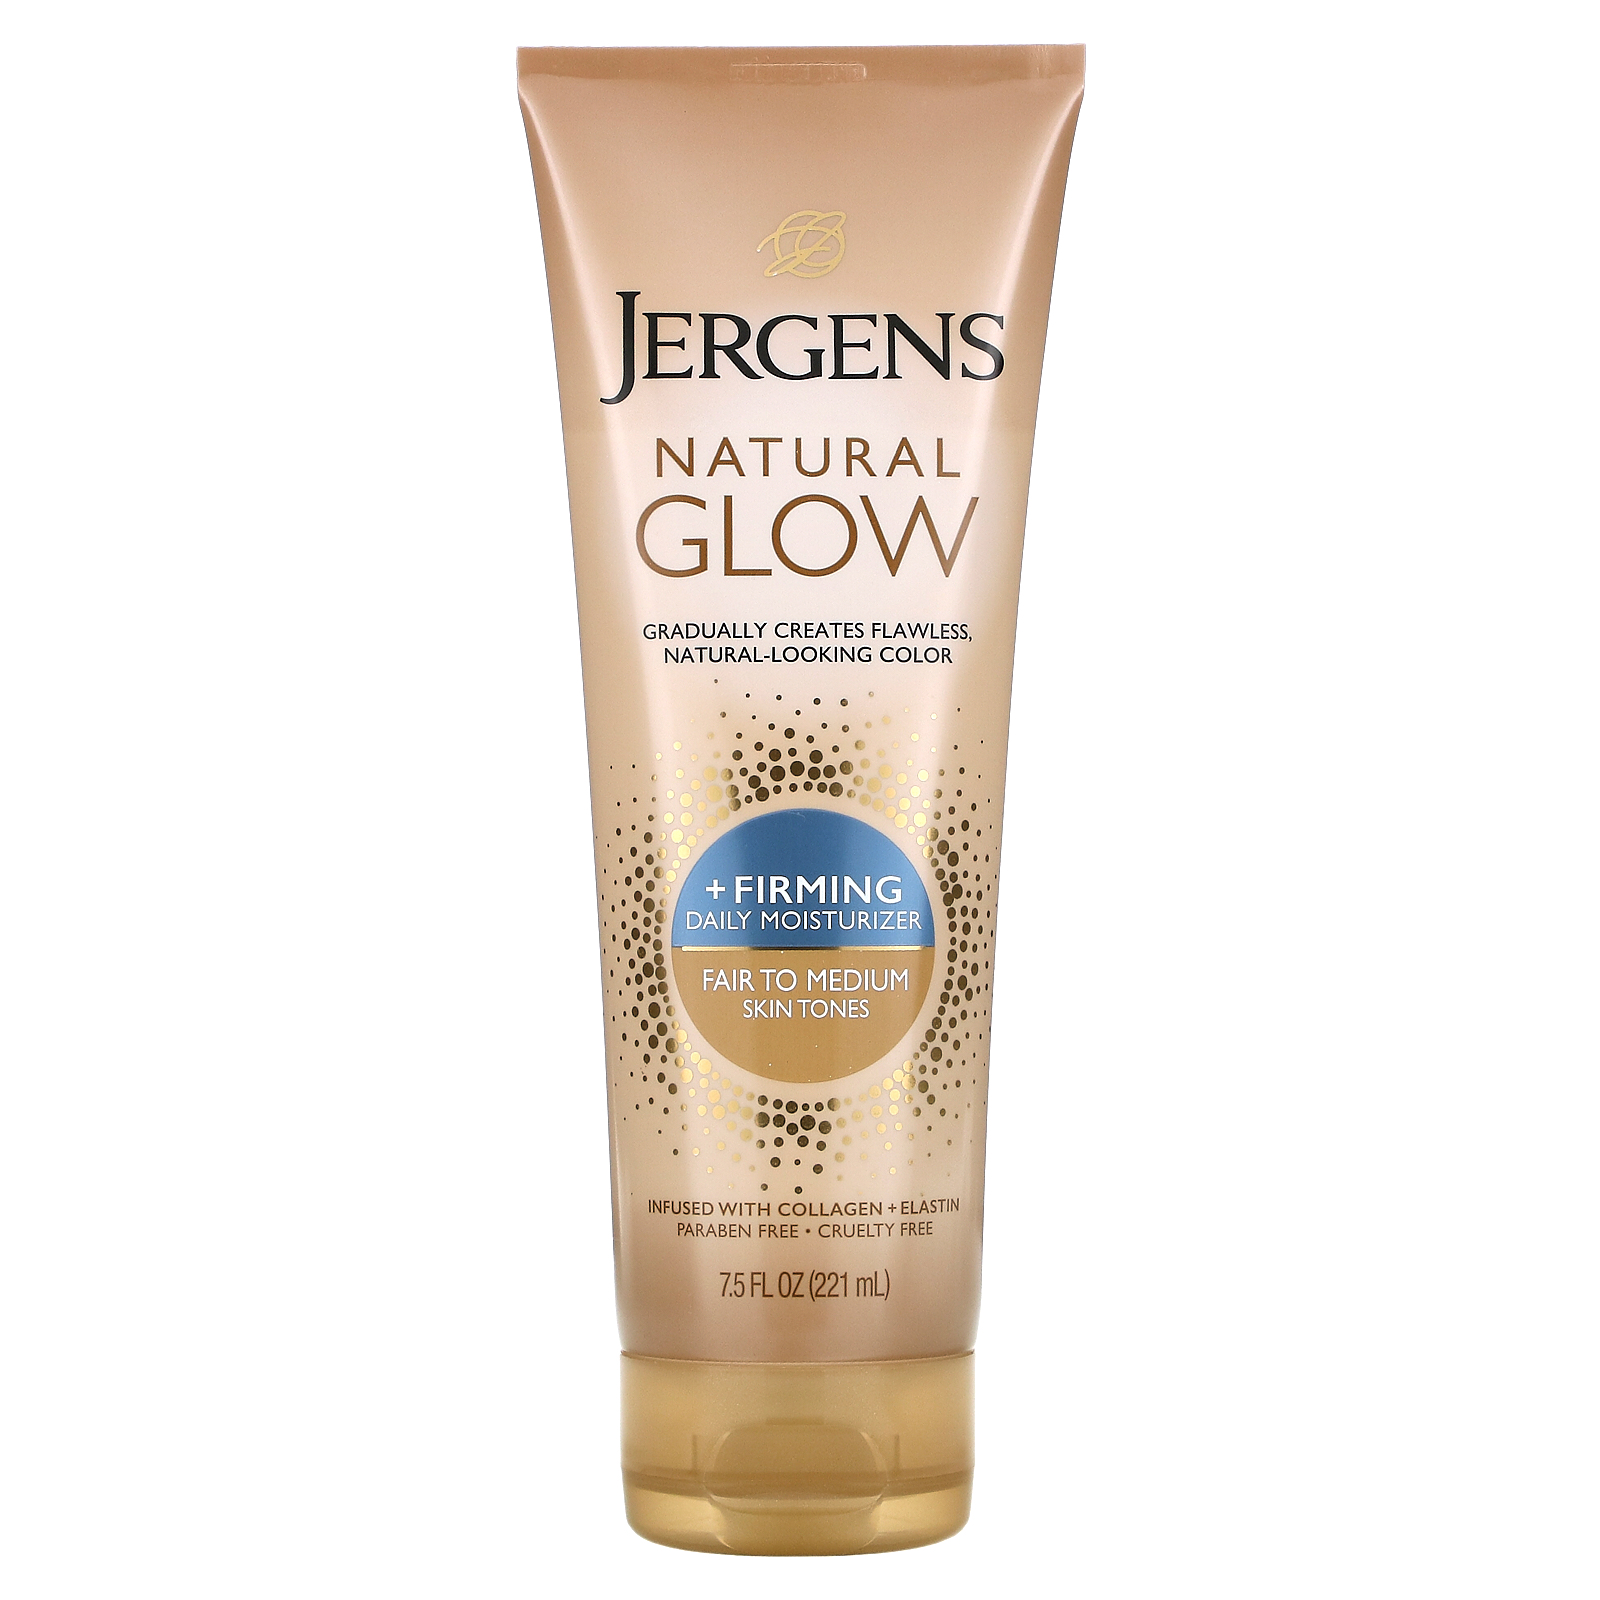 jergens-original-beauty-lotion-all-about-beauty-101